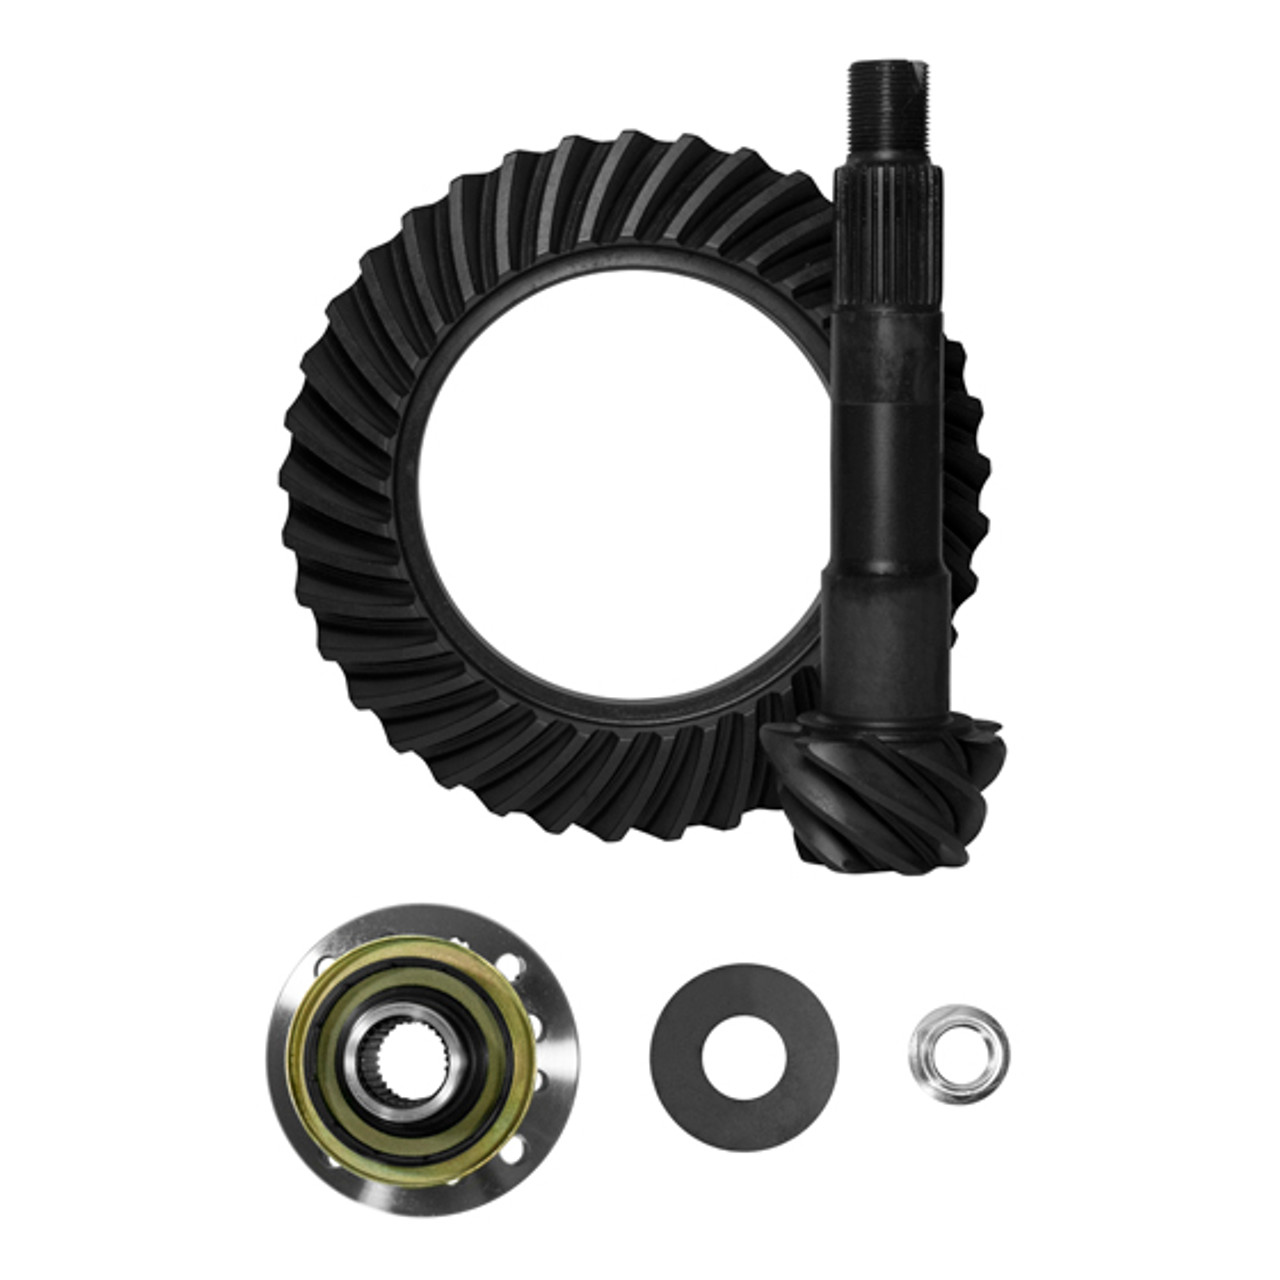 USA Standard Ring & Pinion gear set for Toyota 8" in a 5.71 ratio